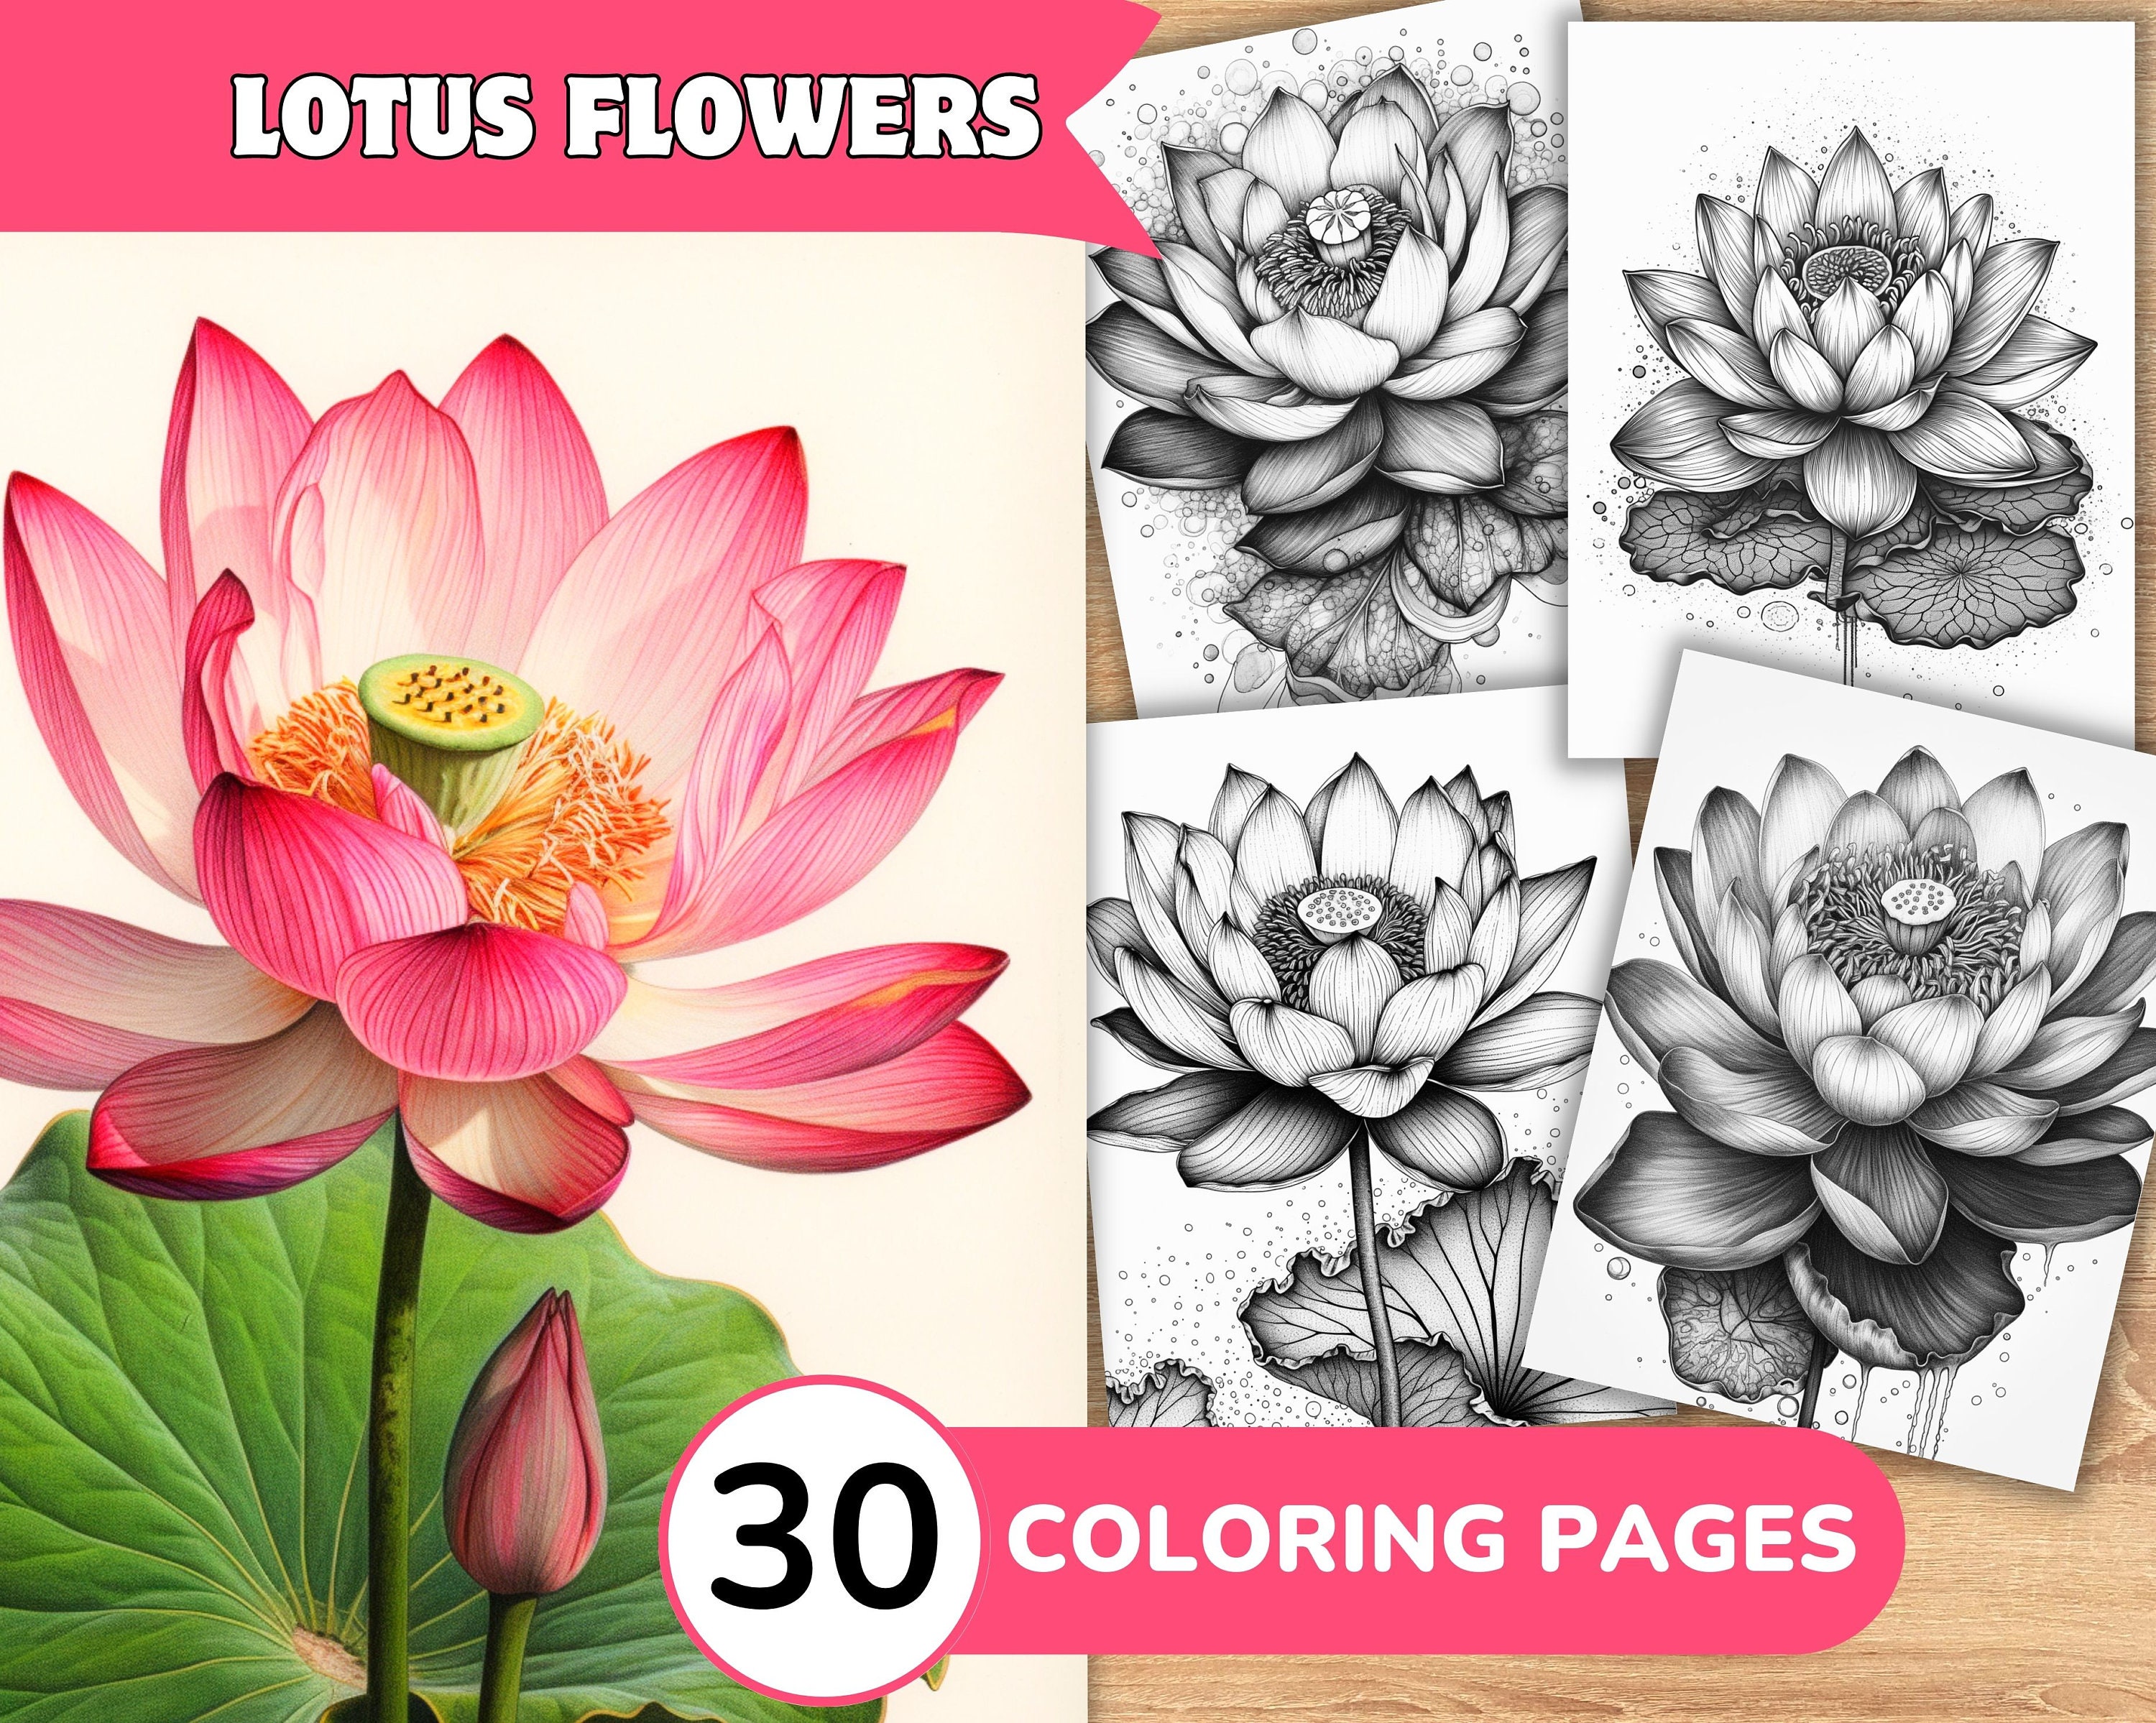 Lotus flowers grayscale coloring pages book lotus flowers grayscale coloring realistic lotus flower coloring grayscale